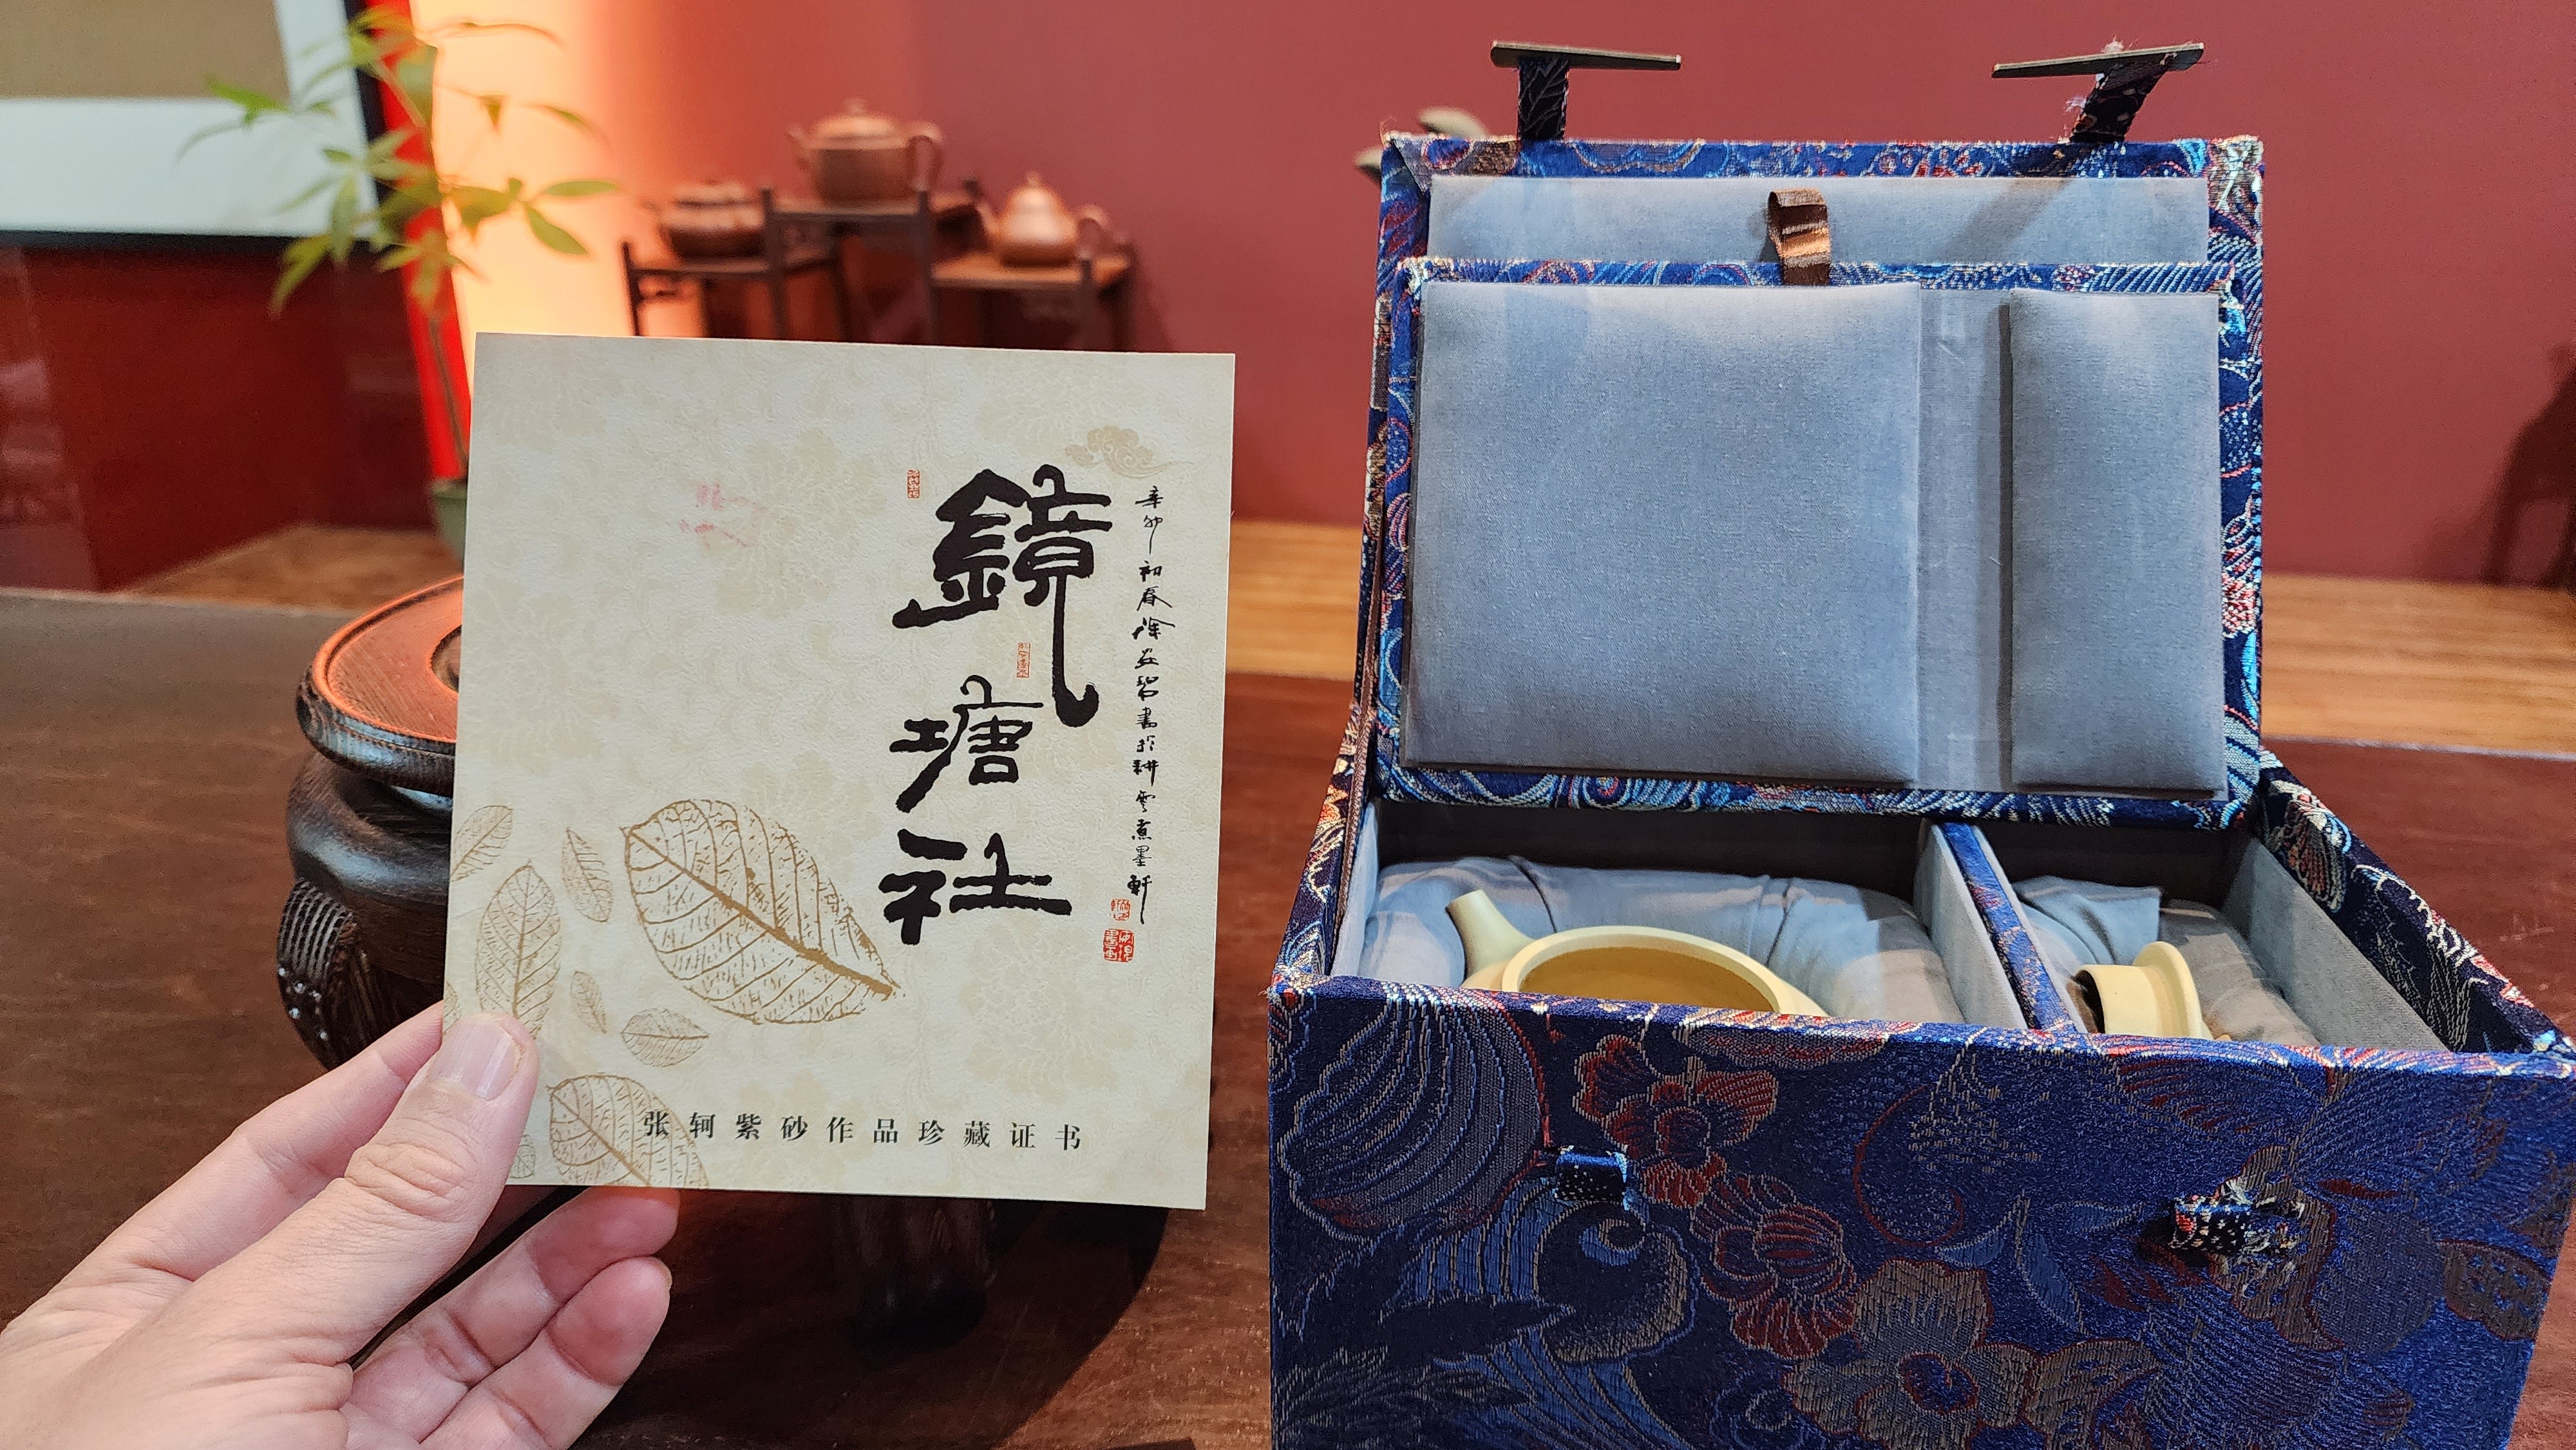 Yun Ying 云婴, 133ml, BenShan LüNi 本山绿泥 (Cao Family's 100% pure BenShan LüNi), made by L4 Assoc Master Artist Zhang Ke 助理工艺美术师, 张轲。- commissioned in April 2023 for our Esteemed Patron from Vietnam.